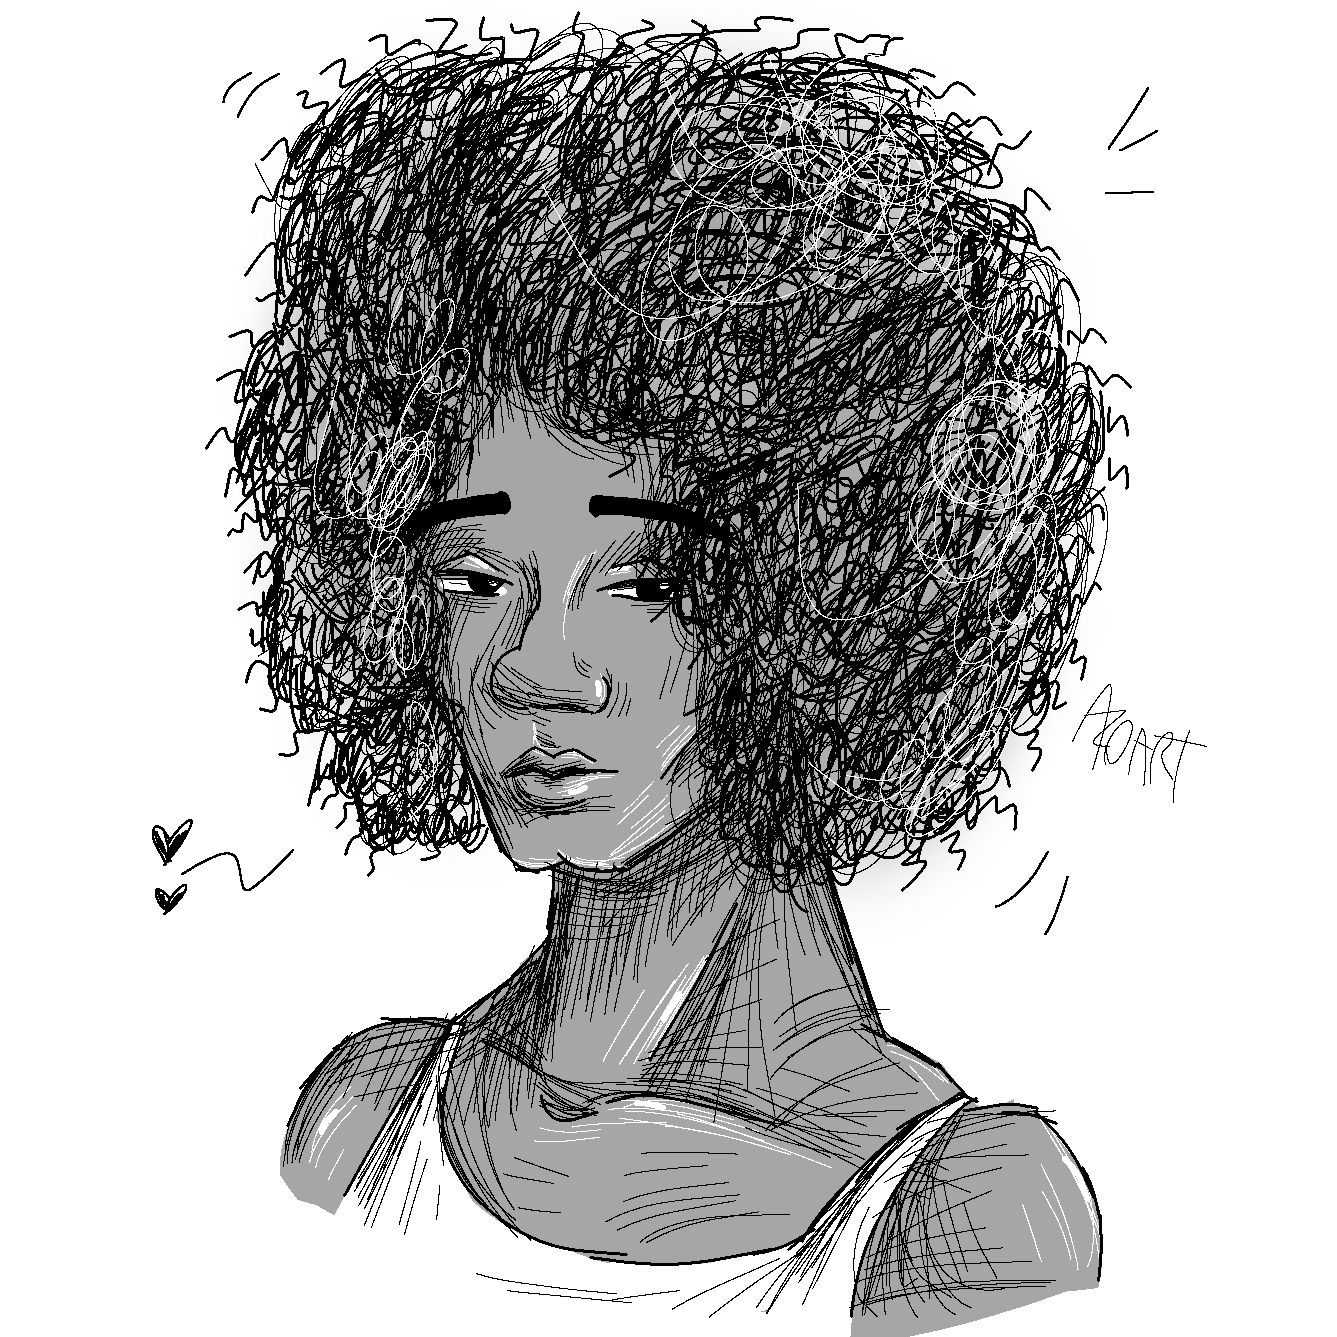 Afro hair study.